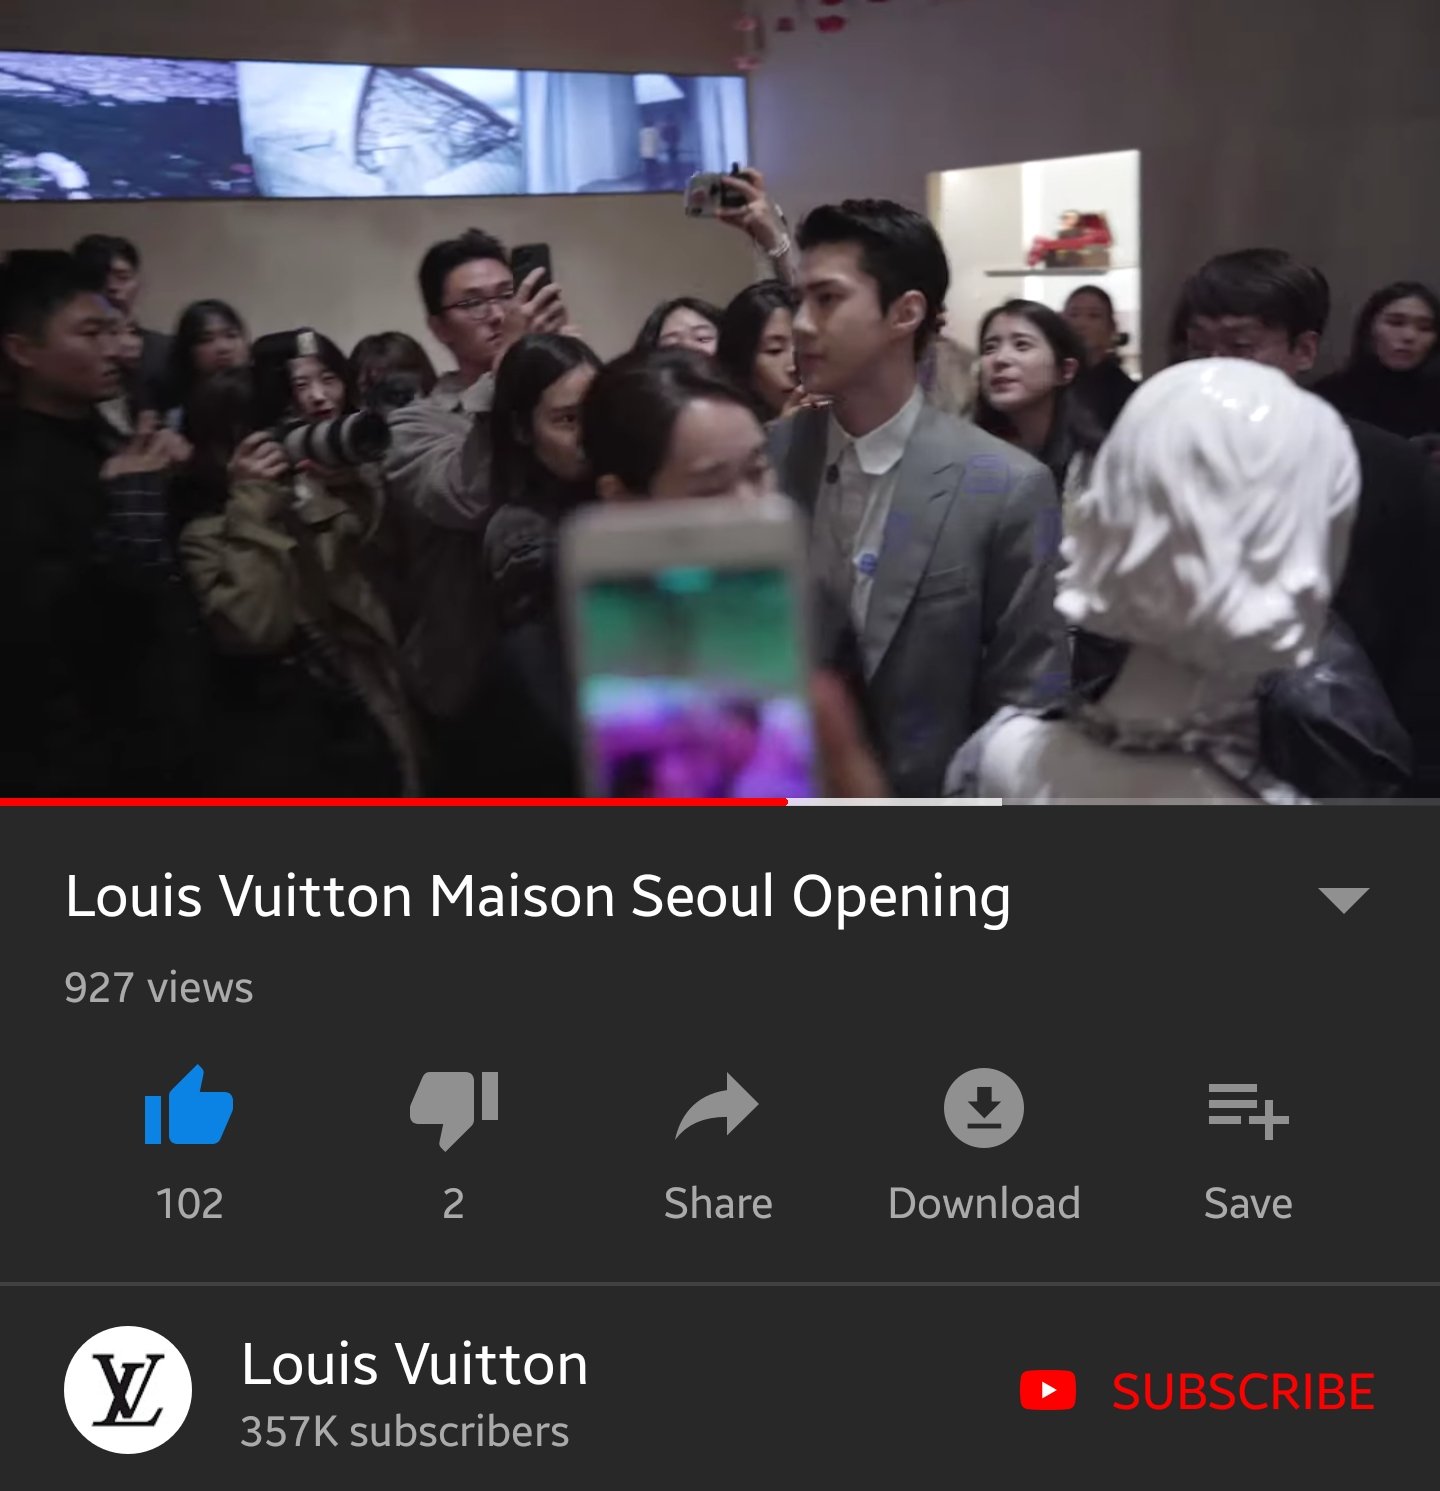 ASTRO's Cha Eunwoo, NCT's Jaehyun, and EXO's Sehun caused major buzz for  their good looks at a Louis Vuitton event